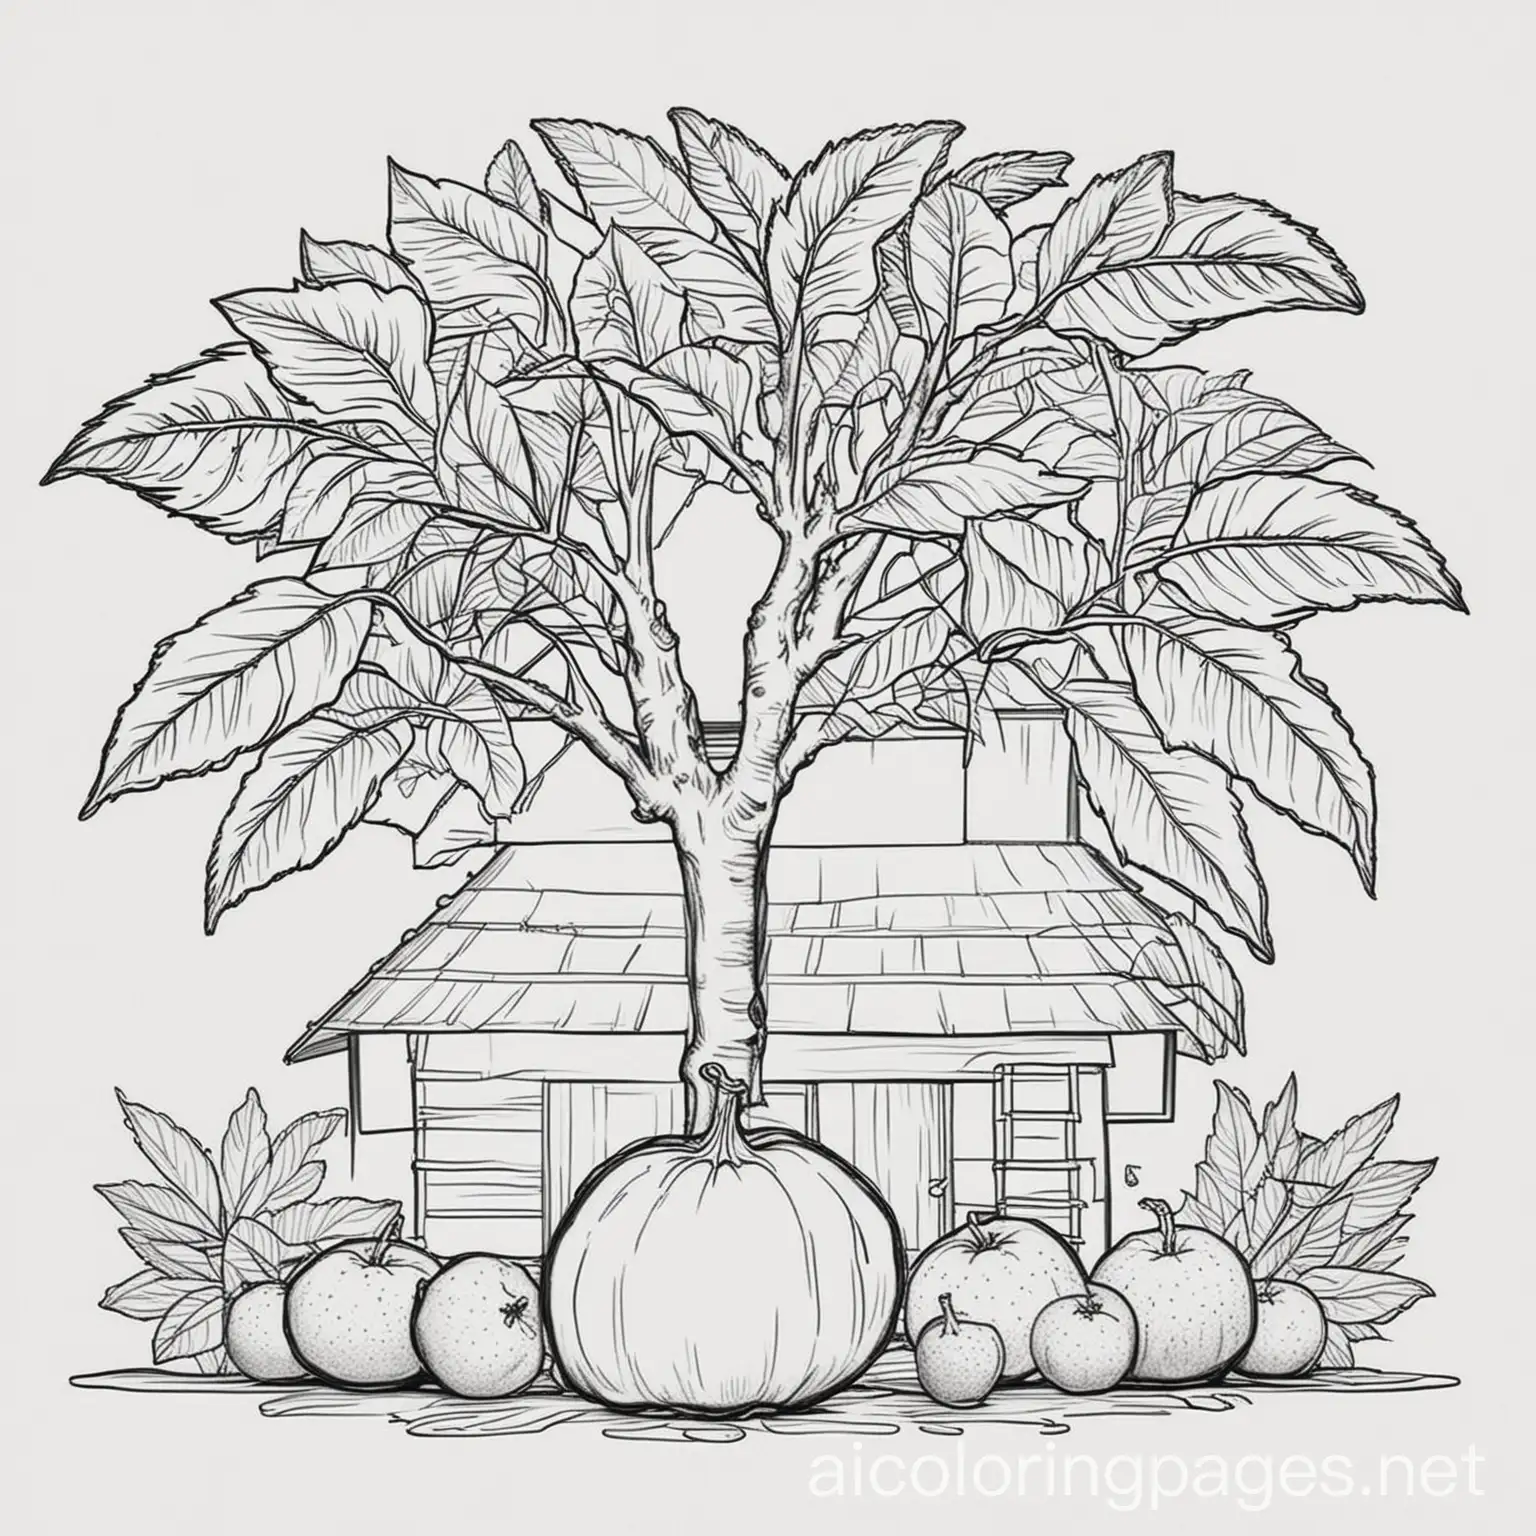 Pomelo with tress in farm house, Colouring Page, black and white, line art, white background, Simplicity, Ample White Space. The background of the colouring page is plain white to make it easy for young children to colour within the lines. The outlines of all the subjects are easy to distinguish, making it simple for kids to colour without too much difficulty ,, Coloring Page, black and white, line art, white background, Simplicity, Ample White Space. The background of the coloring page is plain white to make it easy for young children to color within the lines. The outlines of all the subjects are easy to distinguish, making it simple for kids to color without too much difficulty